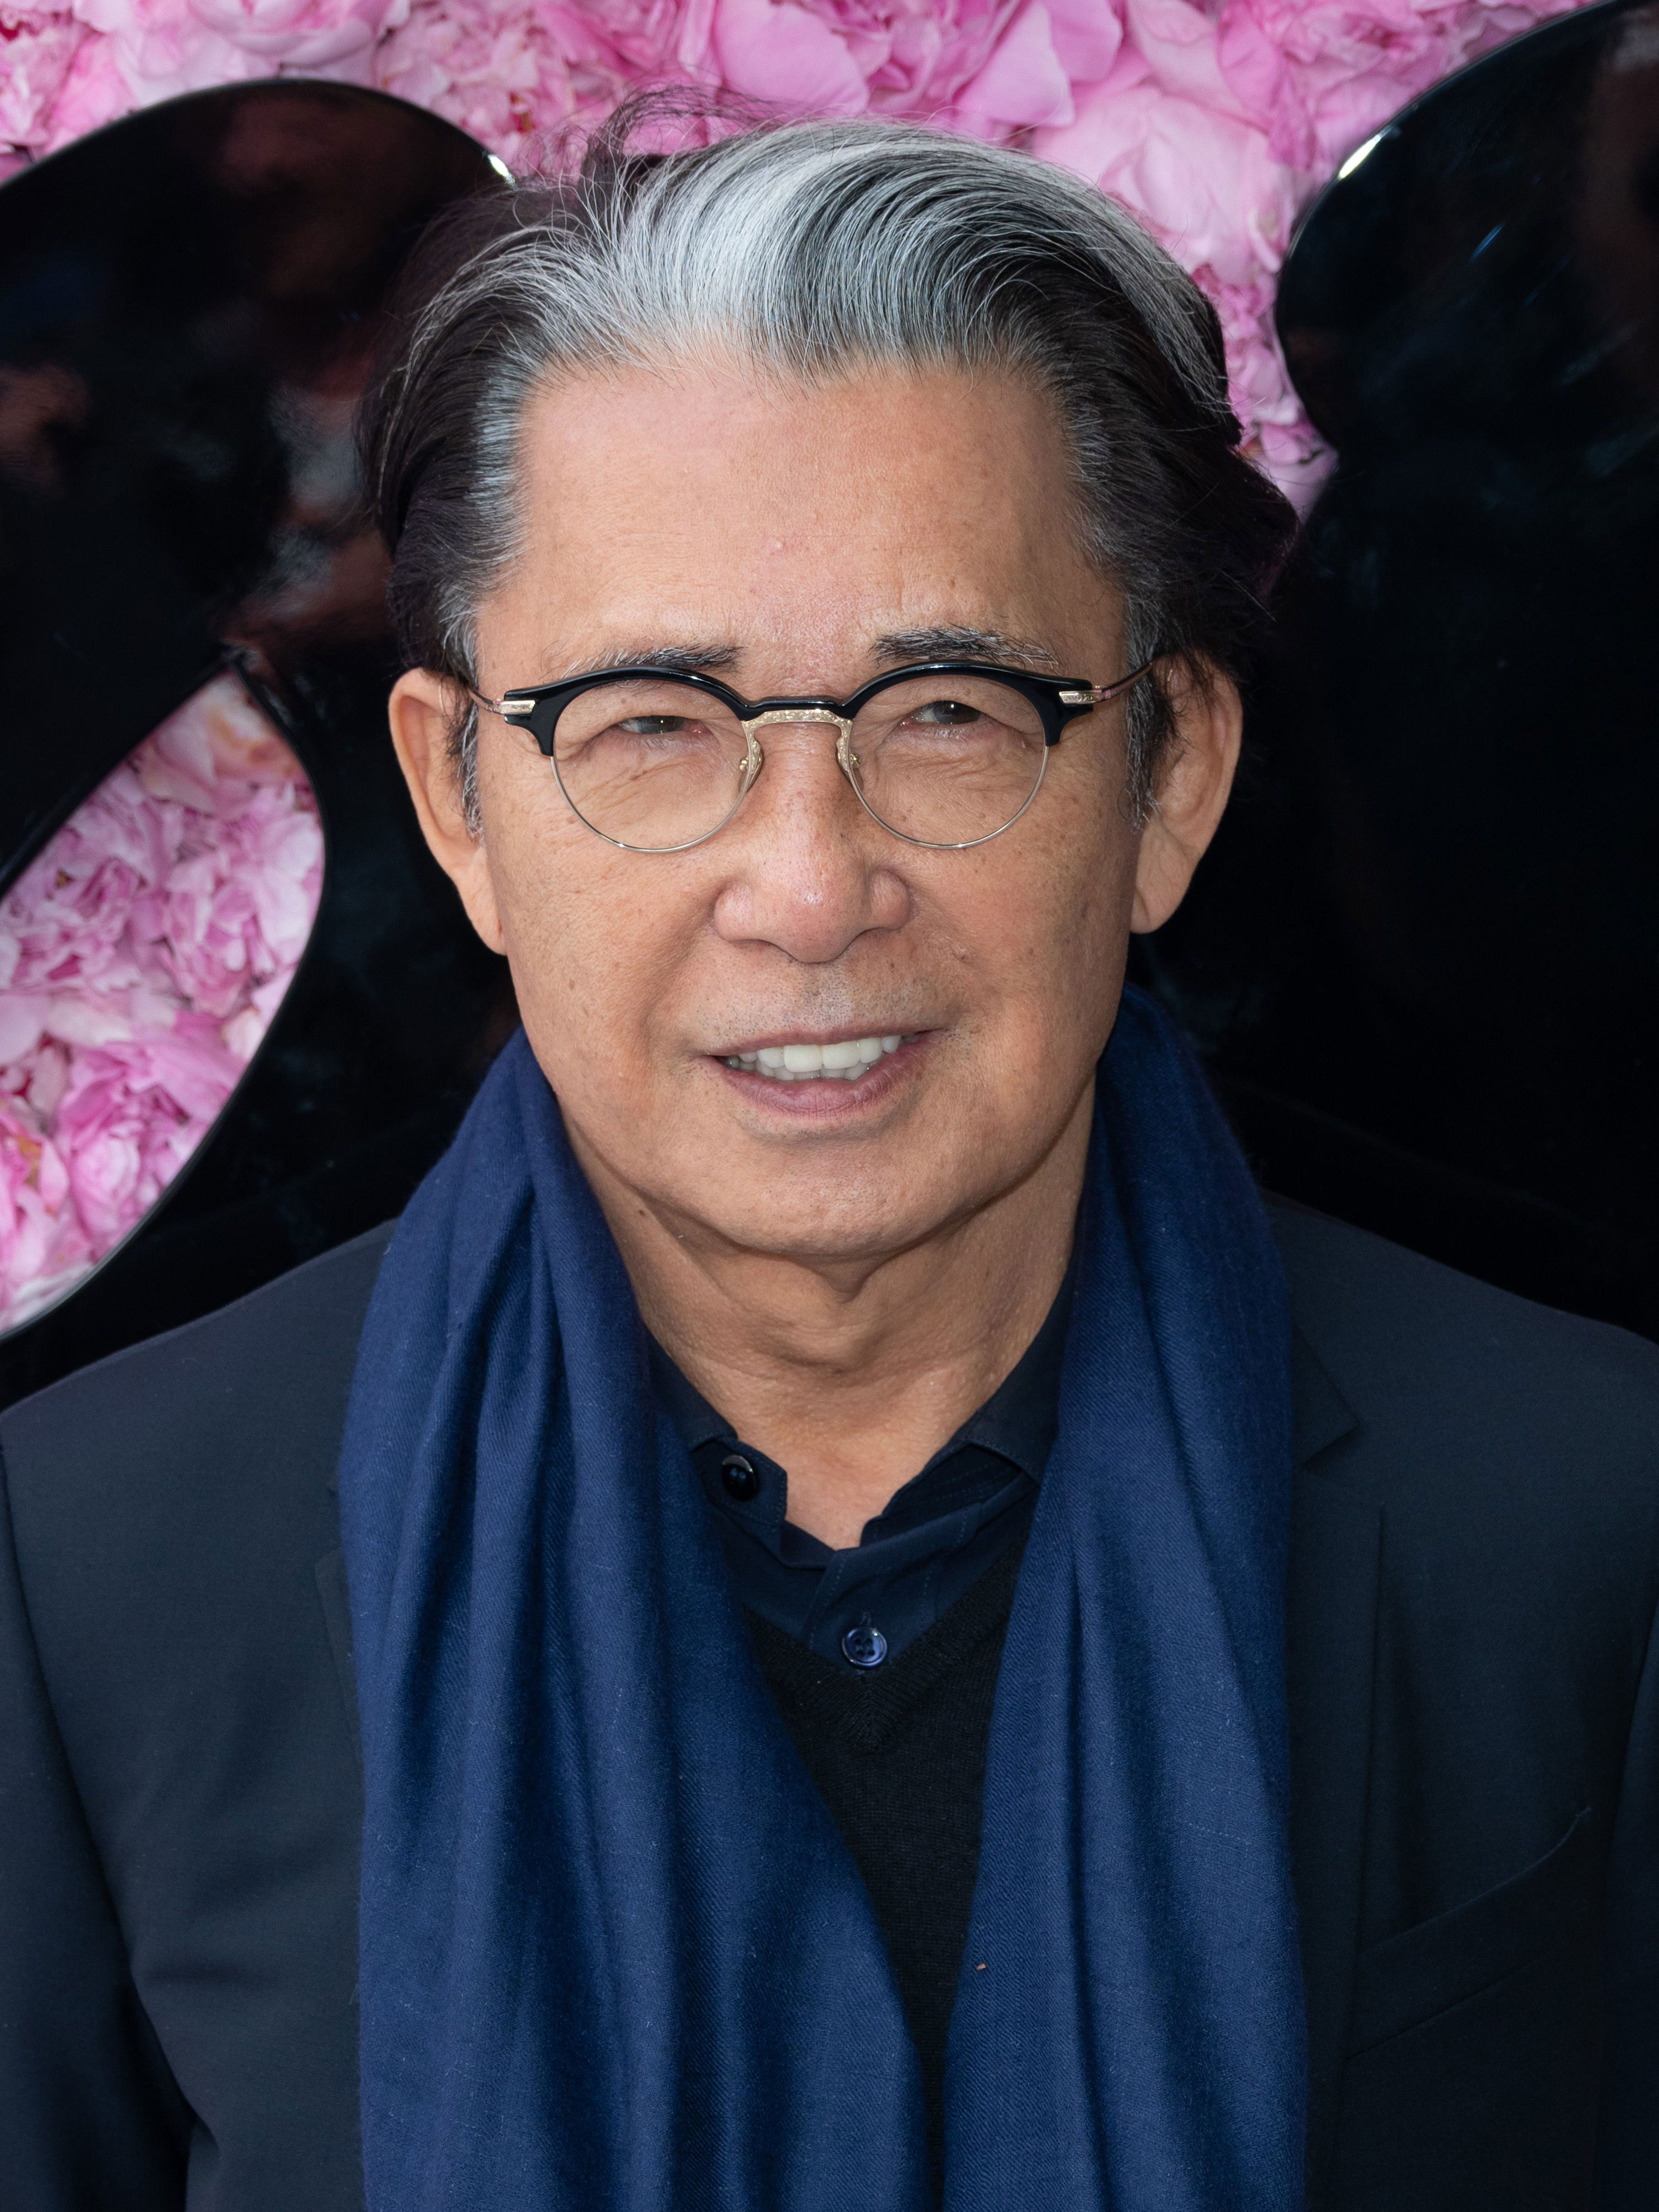 <p>Paris-based Japanese designer Kenzo Takada died from coronavirus-related complications on Oct. 4, a spokesperson for one of the fashion visionary's brands confirmed in a statement: "It is with immense sadness that the brand K-3 announces the loss of its celebrated artistic director, Kenzo Takada. The world-renowned designer passed away on October 4th, 2020 due to COVID-19 related complications at the age of 81 at the American Hospital, in Neuilly-sur-Seine, France."</p>